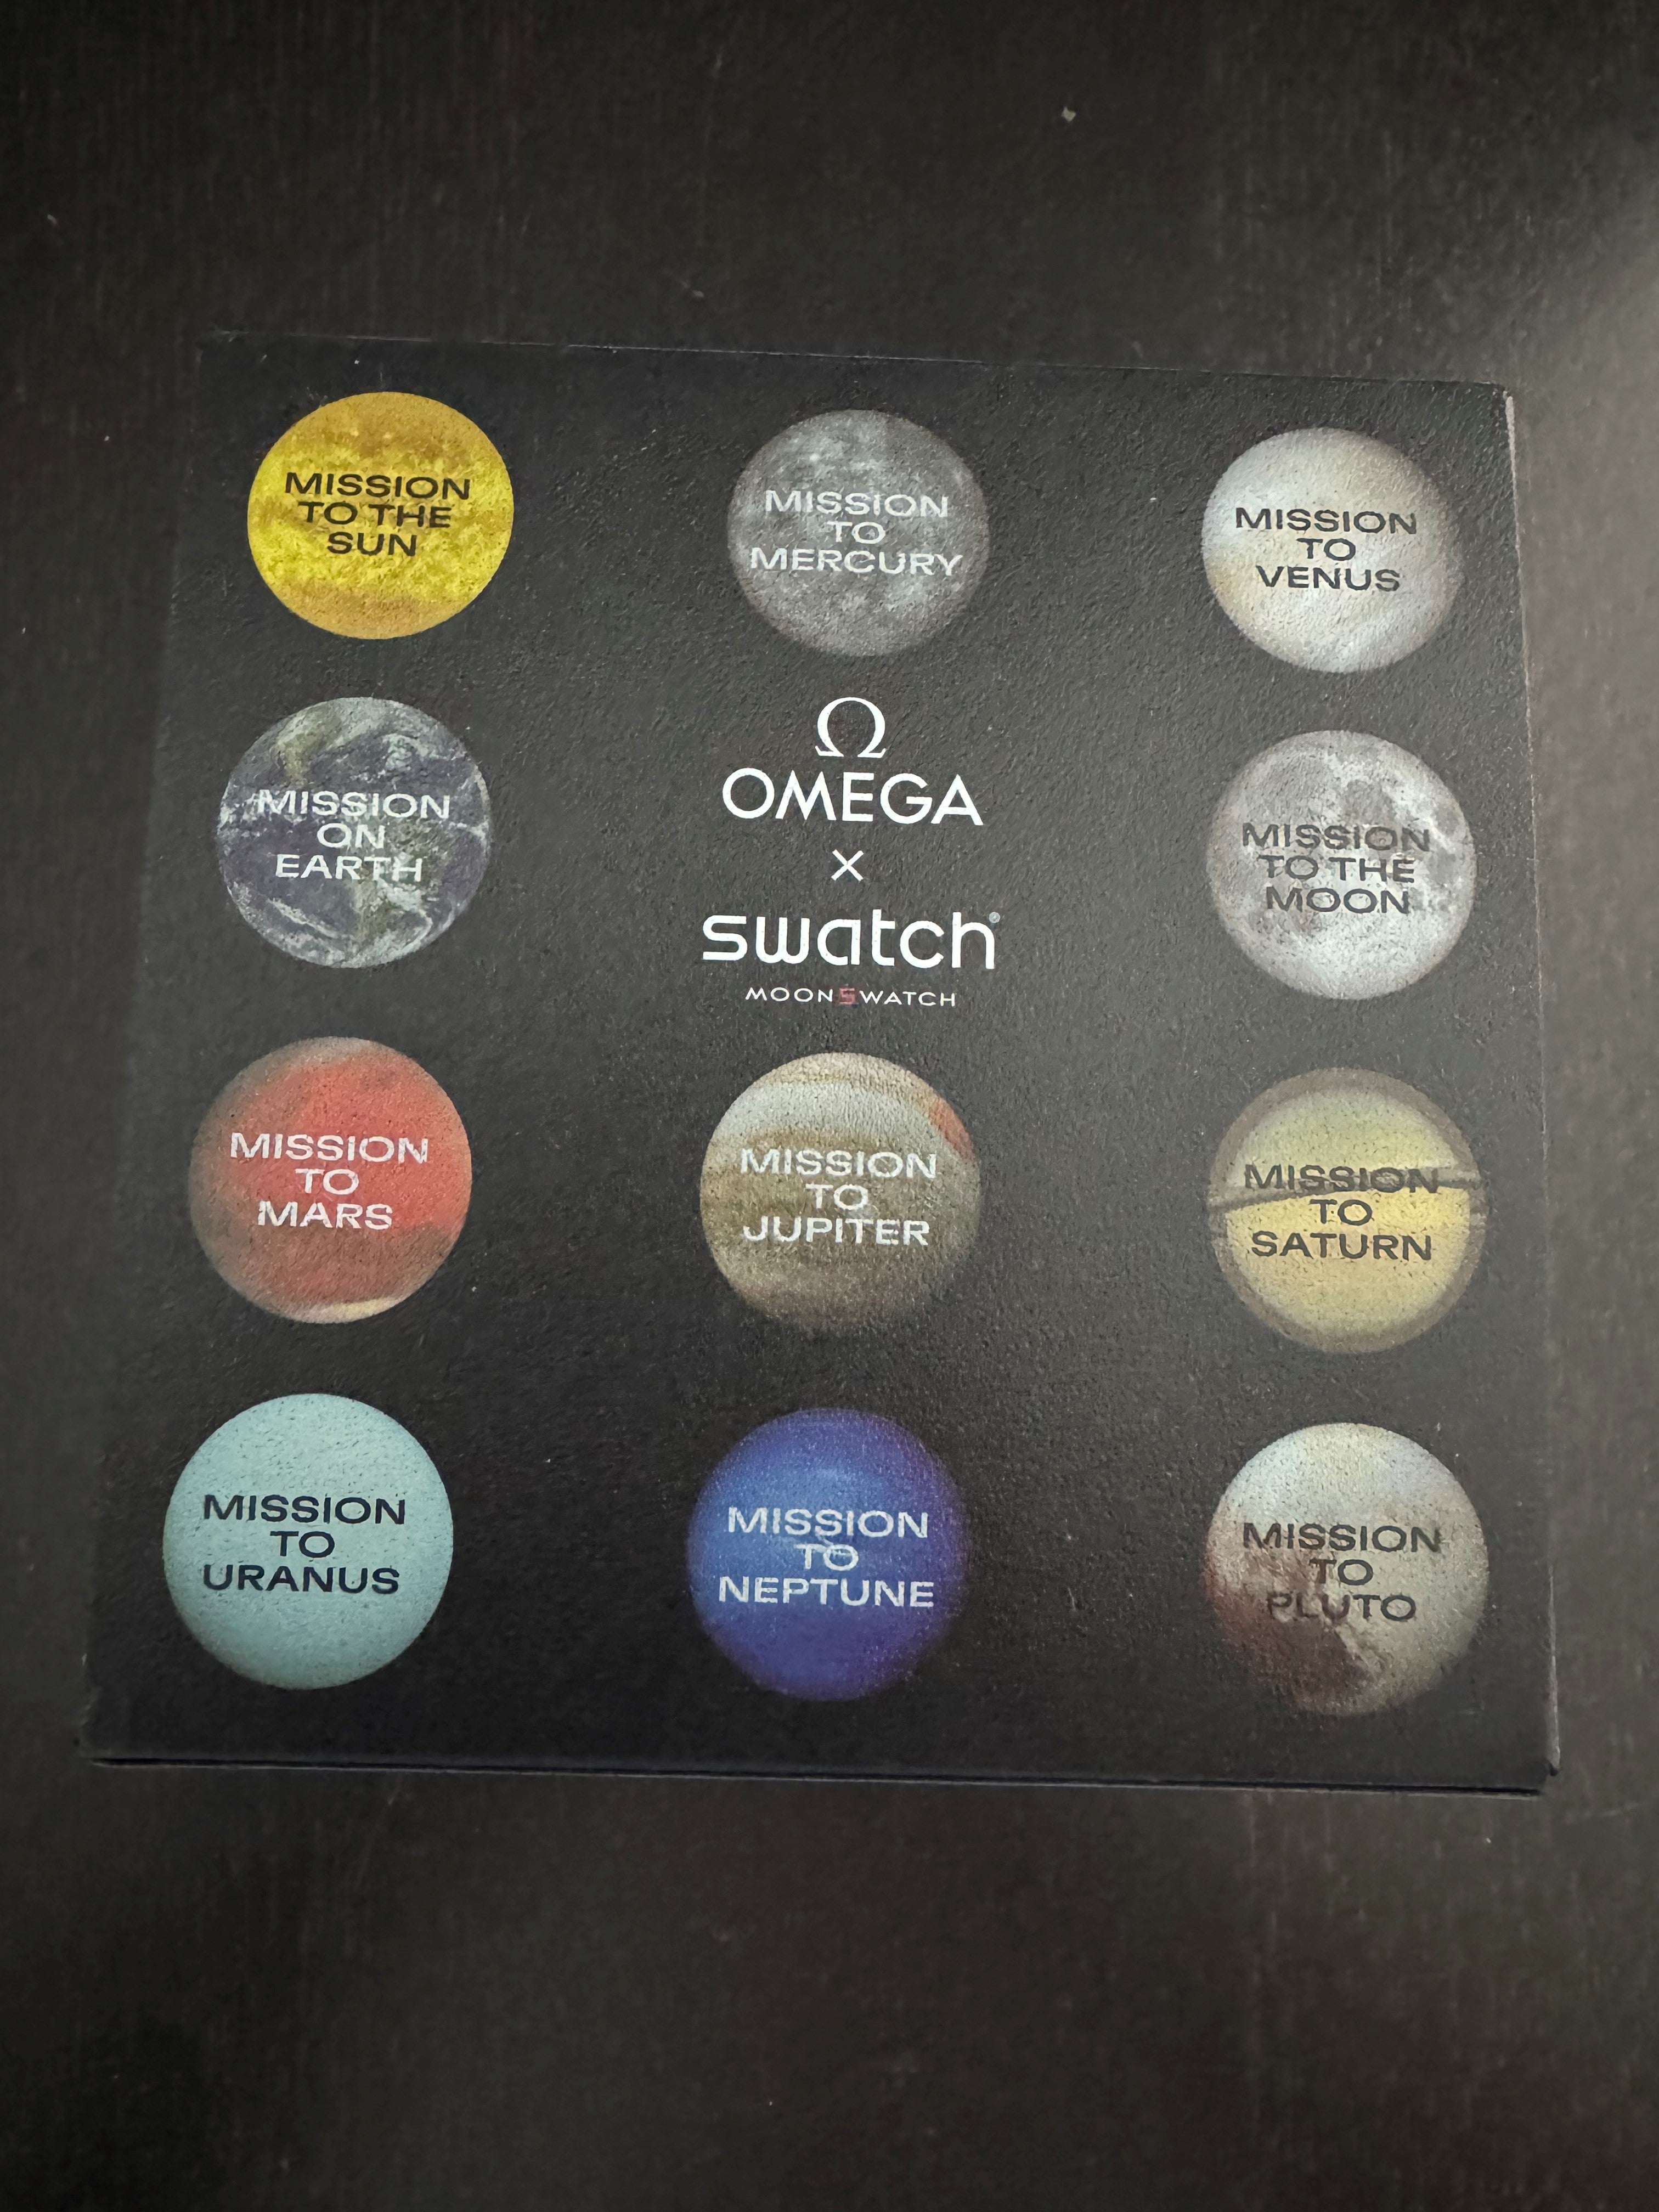 Swatch Moonswatch "Mission To Neptune" Swatch x Omega 42 SO33N100